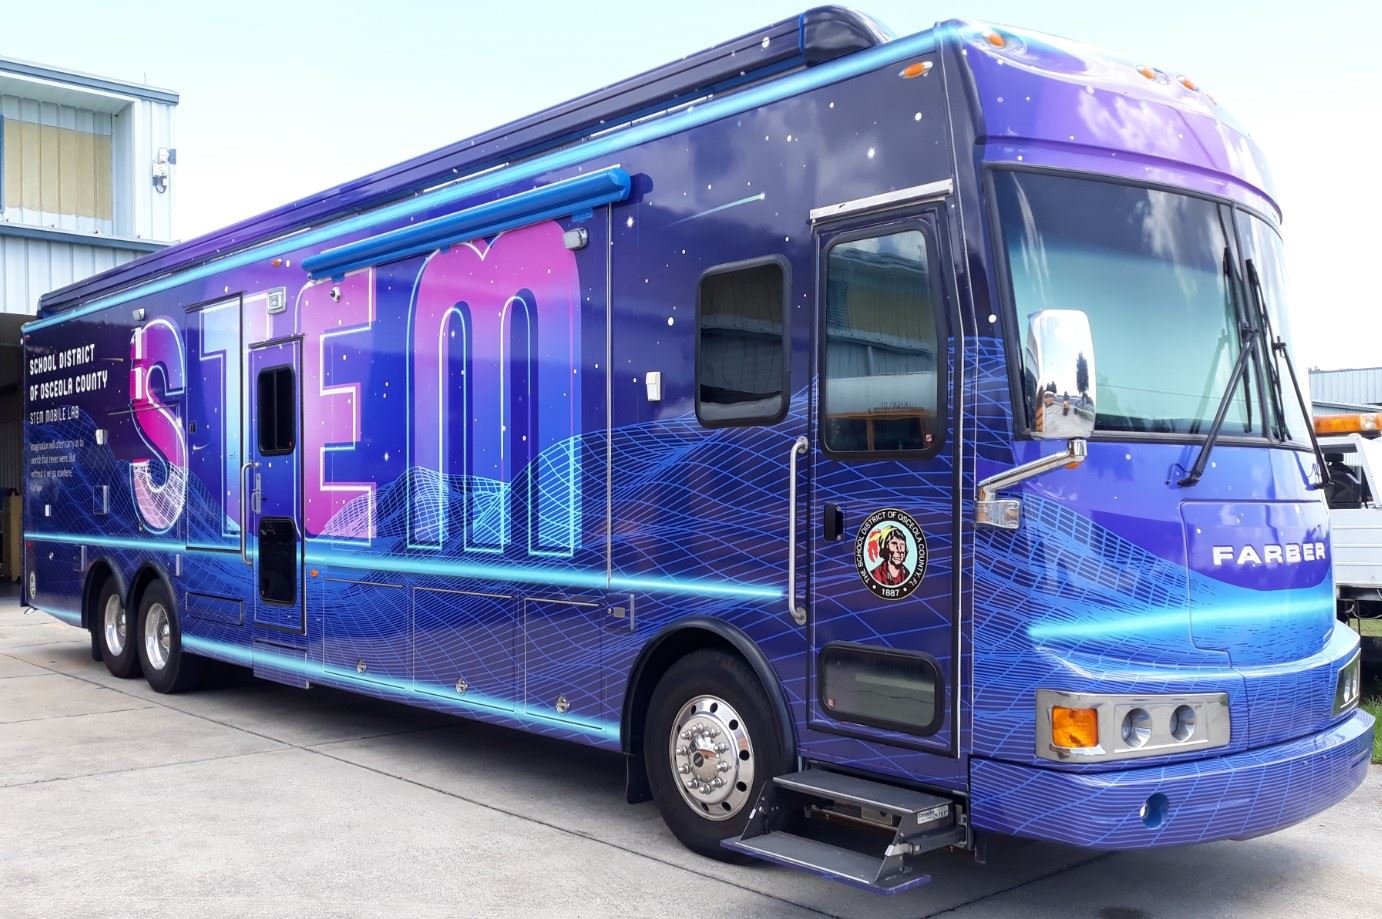 exterior image of the stem mobile lab